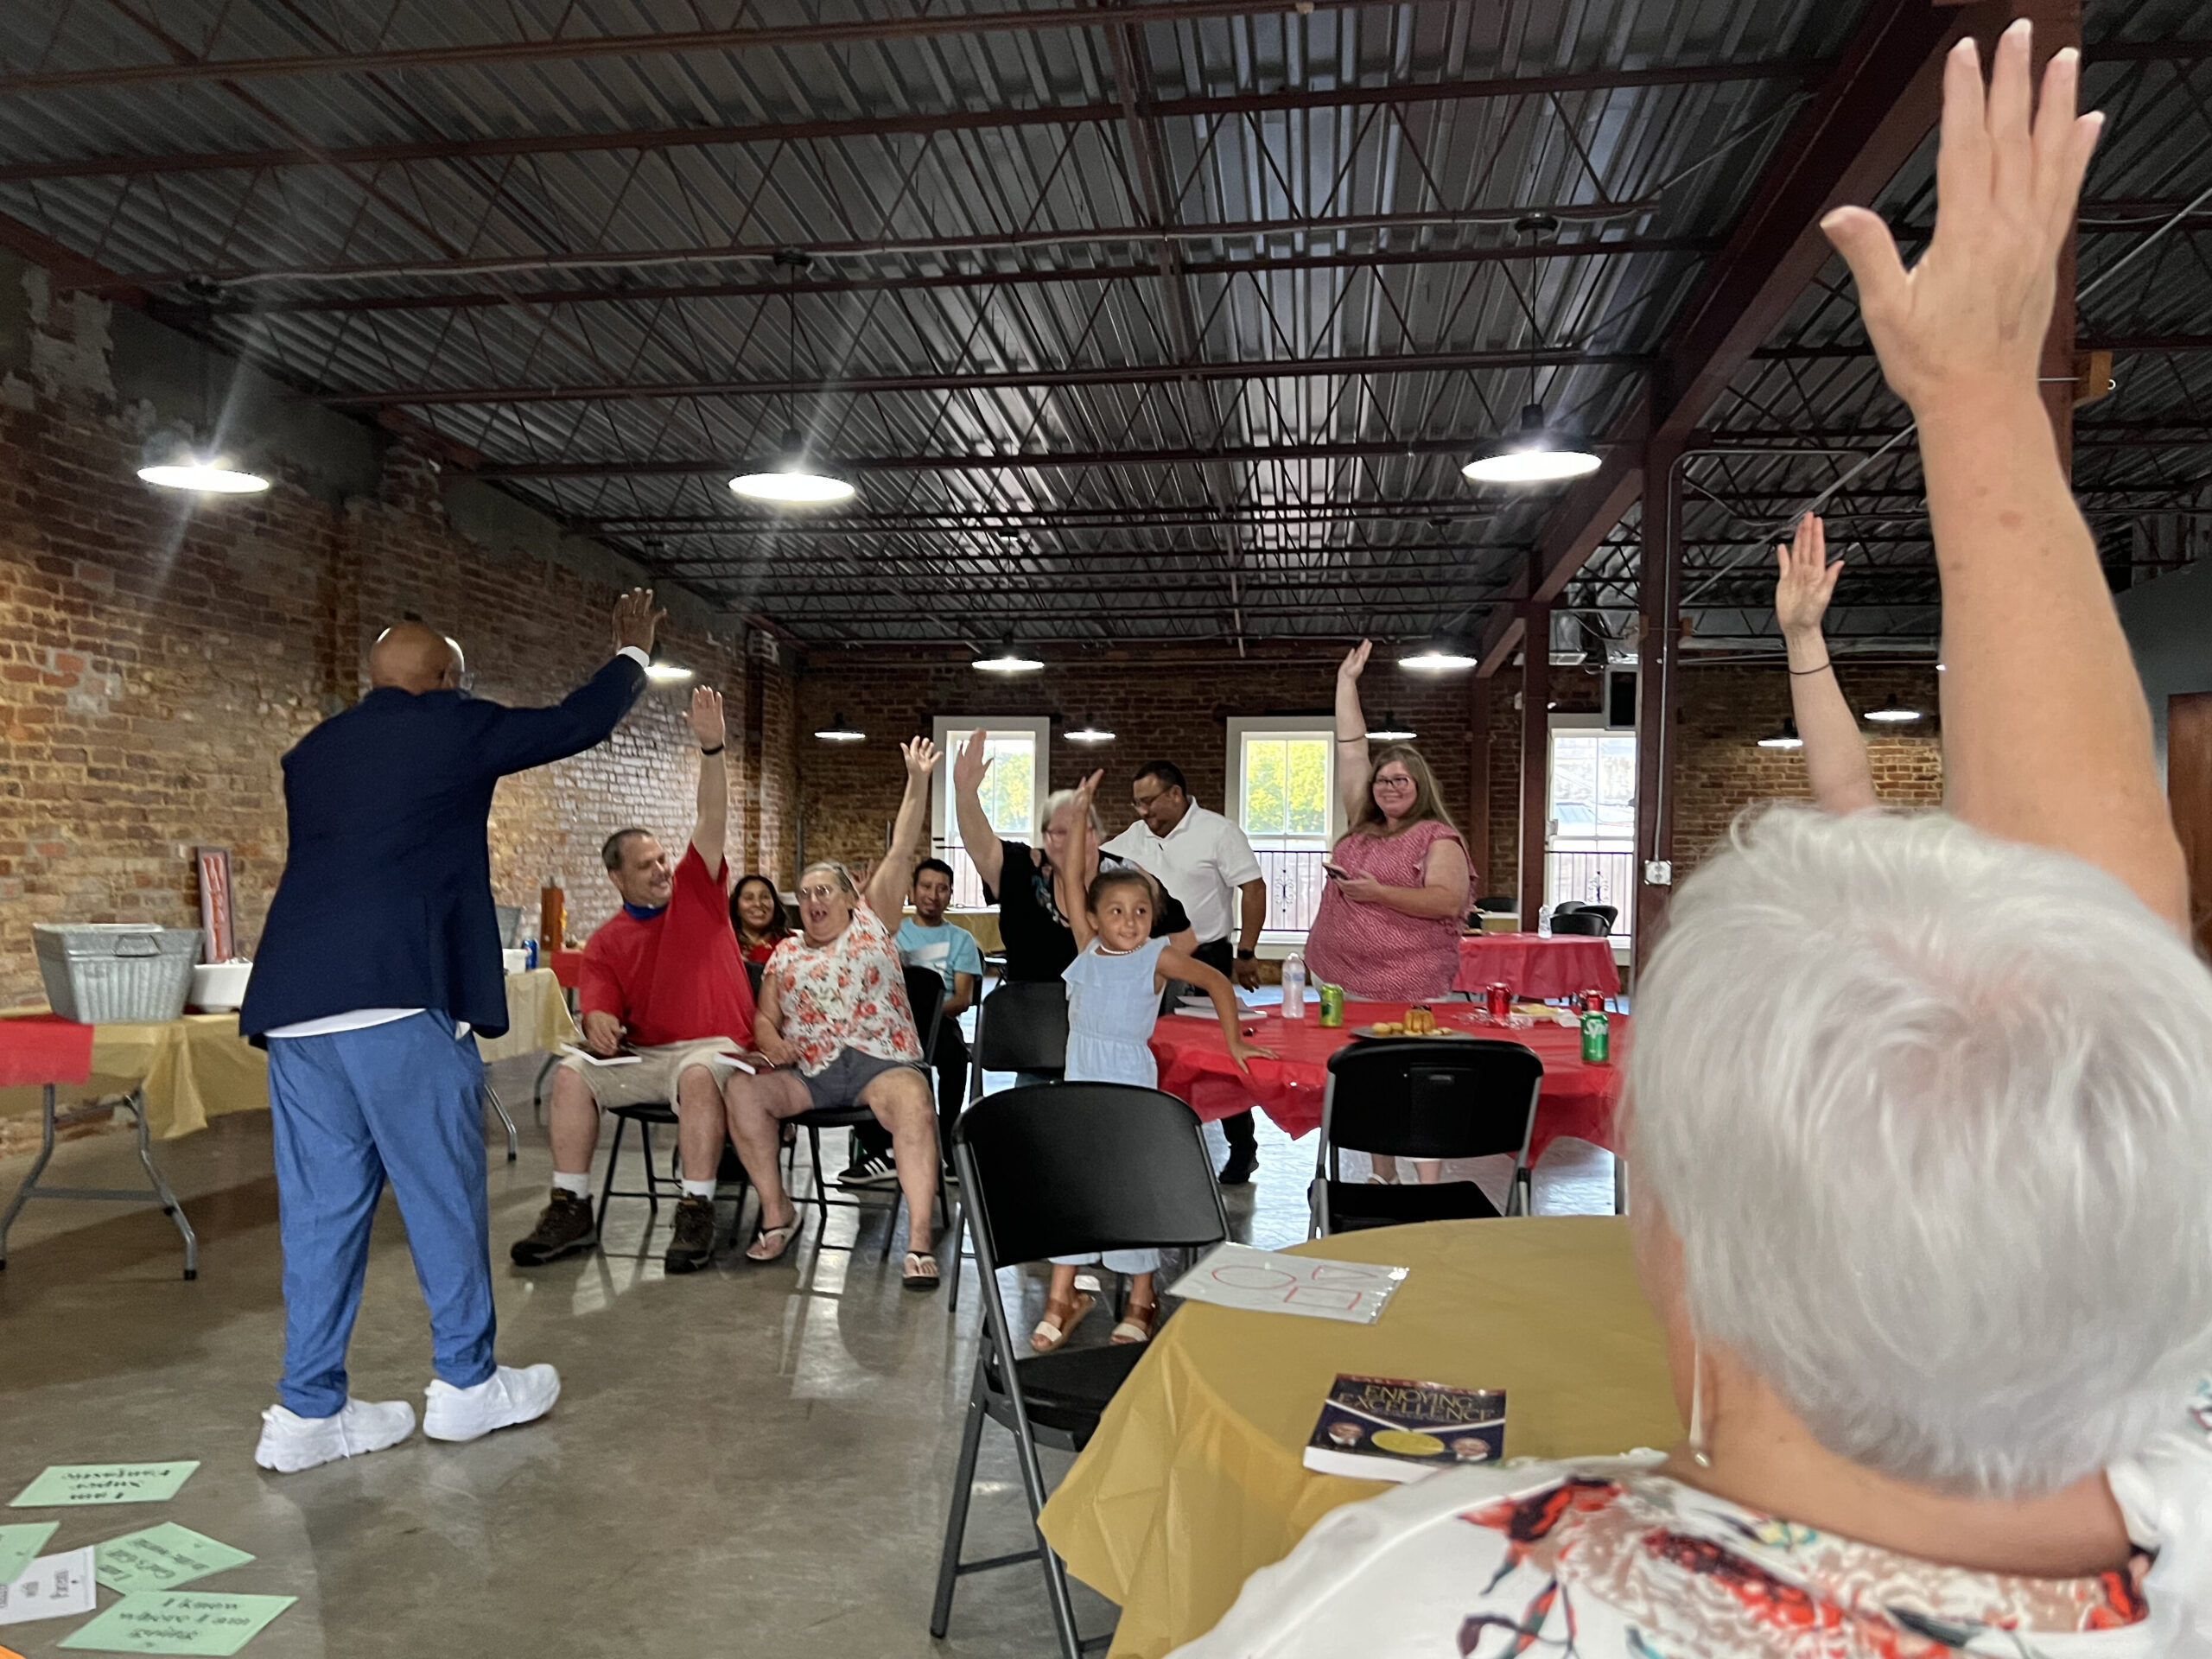 At the Collinsville ENI Kickoff meeting held on the top level of the library, motivational speaker Dr. Earl Suttle engages with the community members. Everyone pictured is raising a hand, laughing as Dr. Suttle asks them a question.